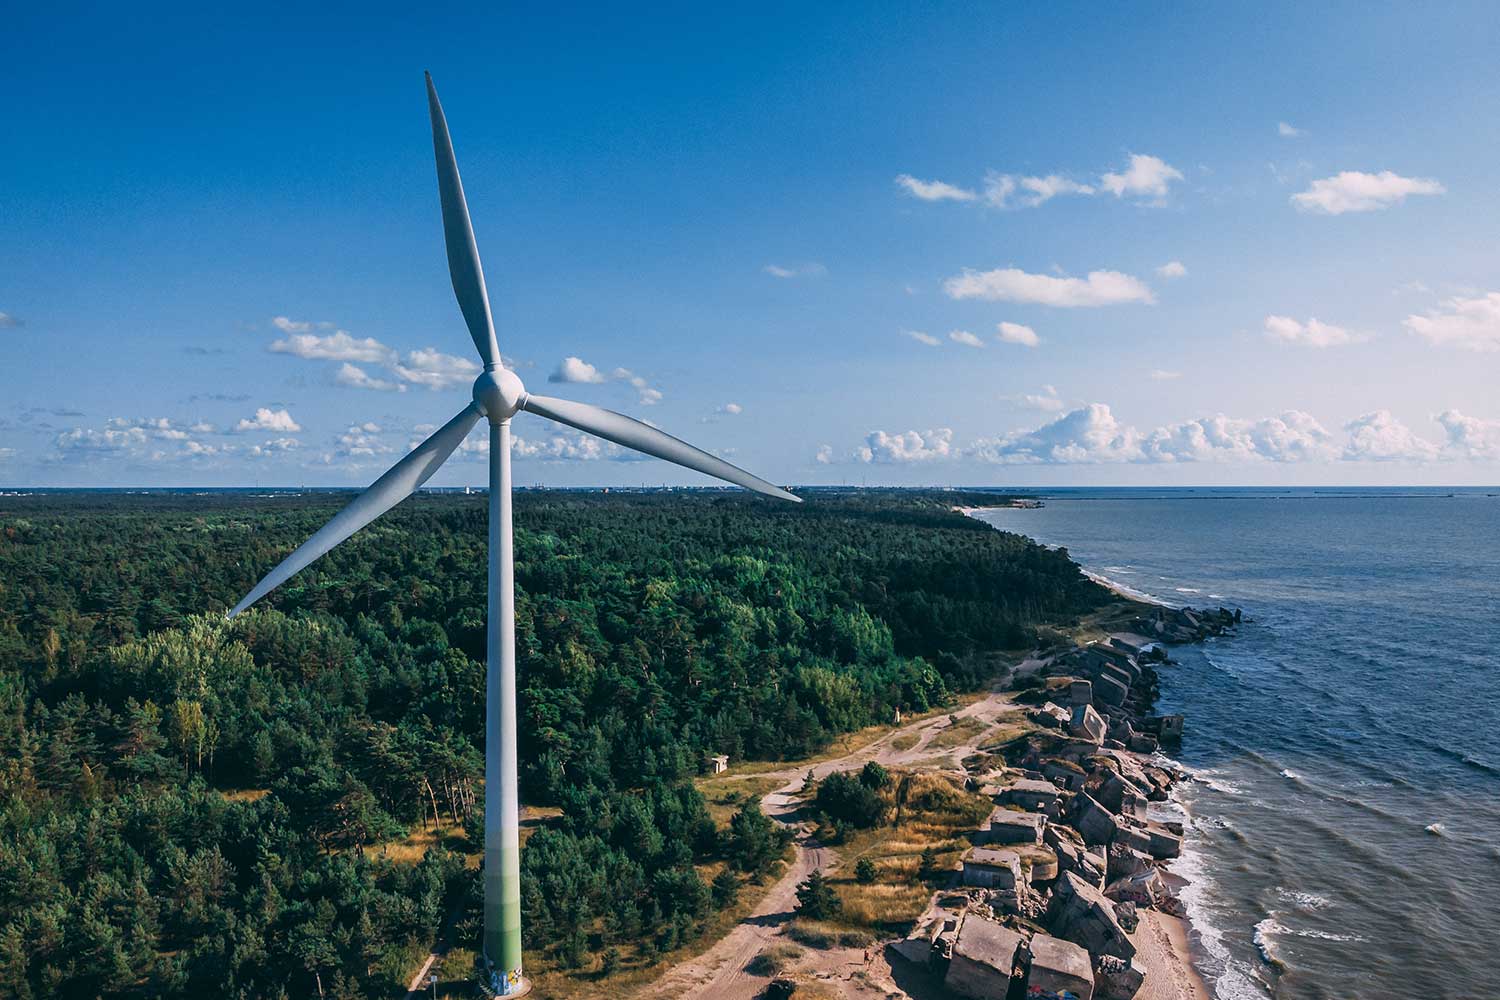 Northern Fort and Liepāja Fortress with wind turbine. | Source: AdobeStock by mjstudio